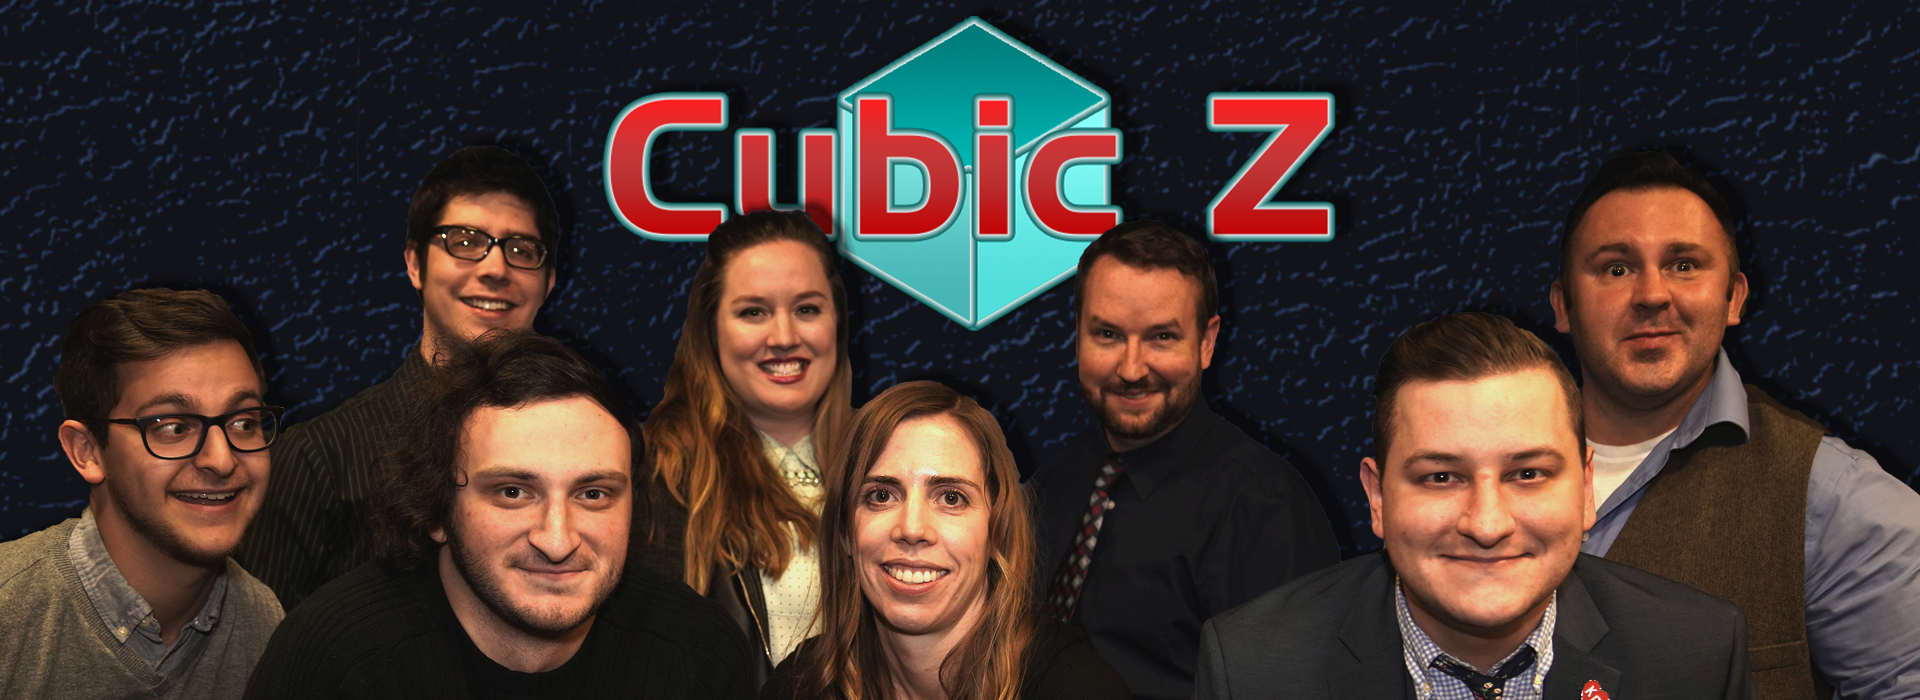 2/23 | 8:00 P.M. The Kick Comedy Show w/Cubic Z (Feat. Adult Turtles)